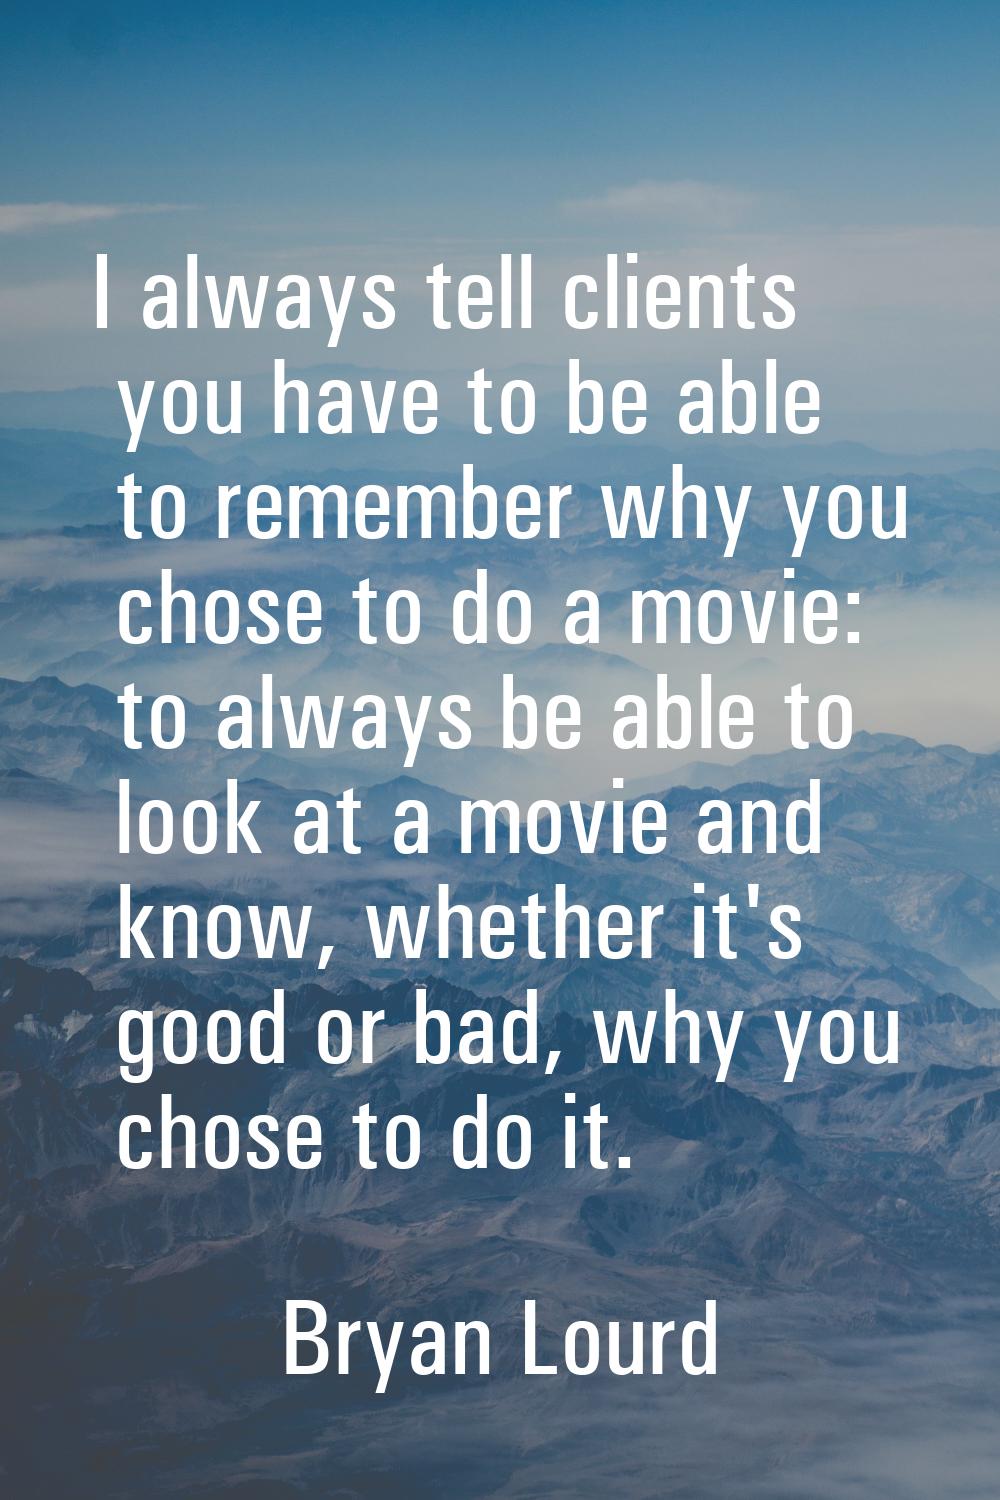 I always tell clients you have to be able to remember why you chose to do a movie: to always be abl